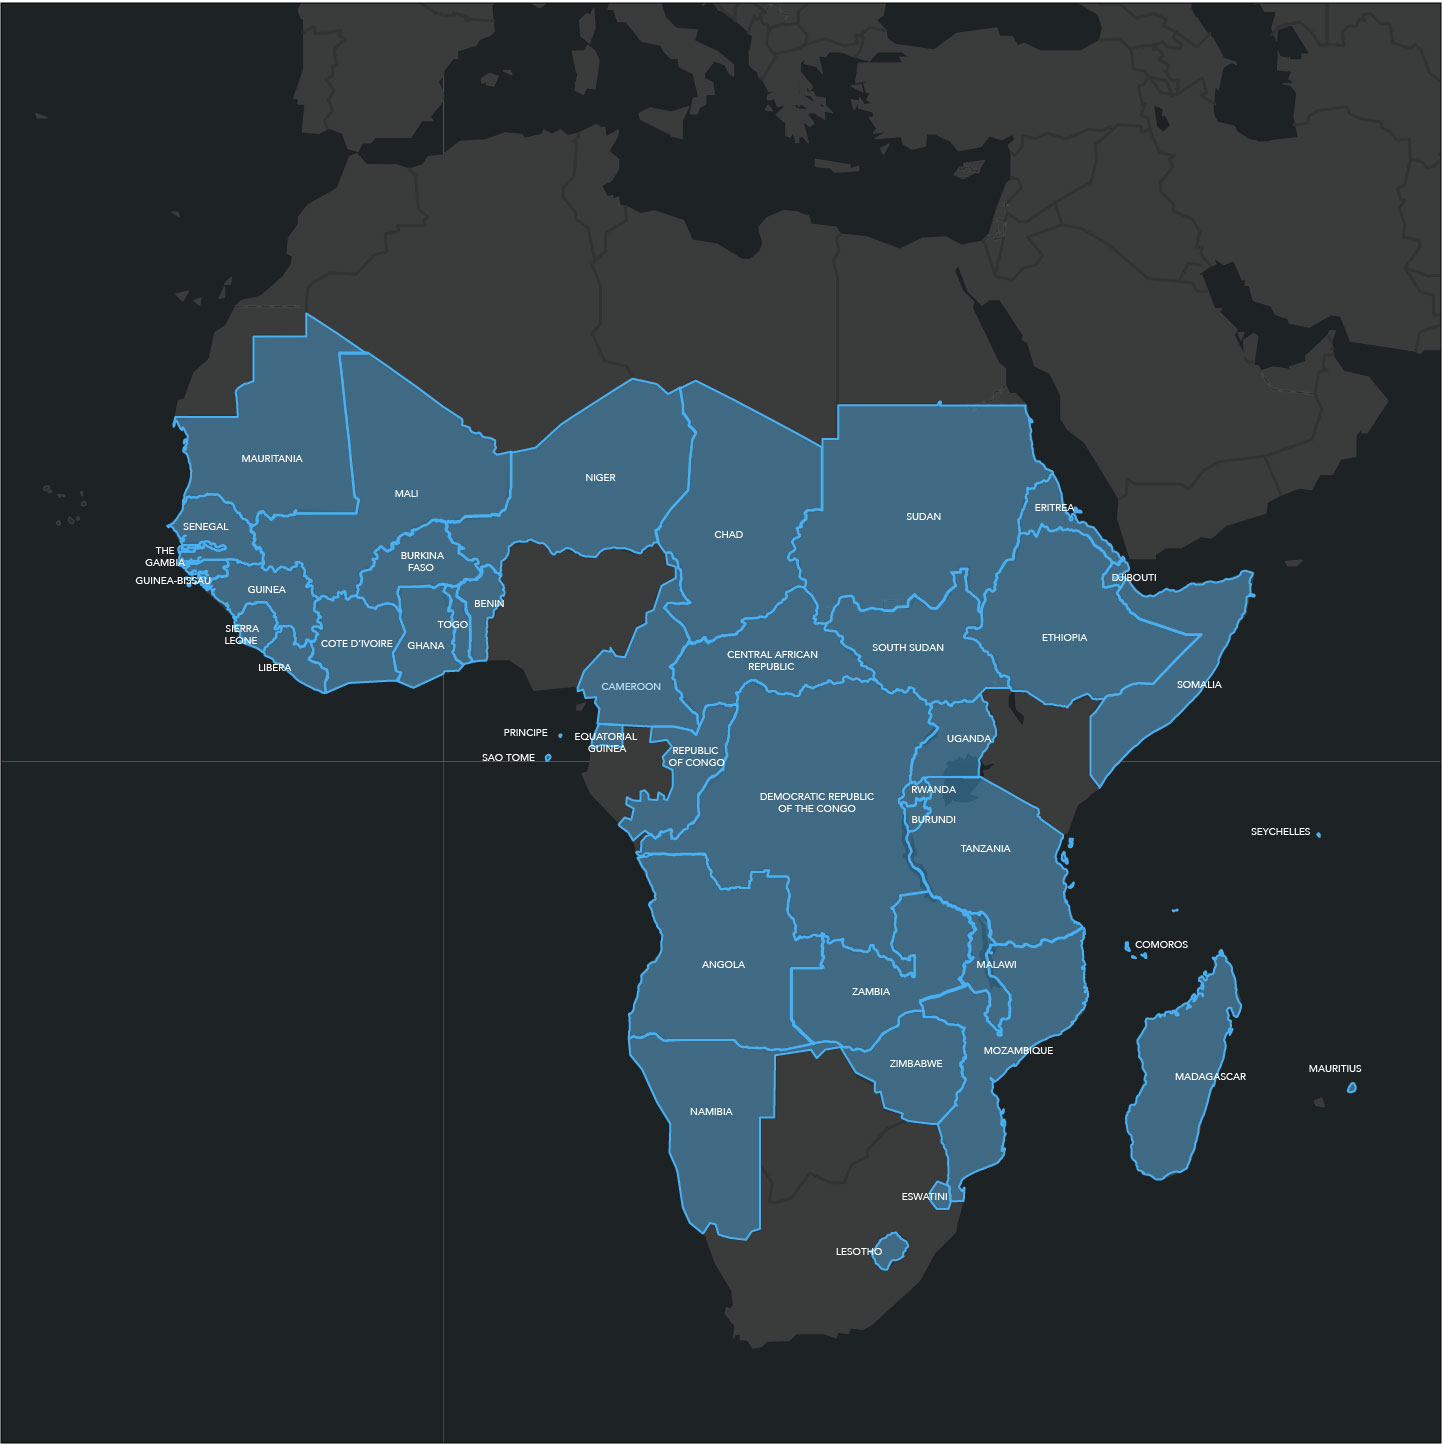 Map of Africa with qualified countries highlighted in blue